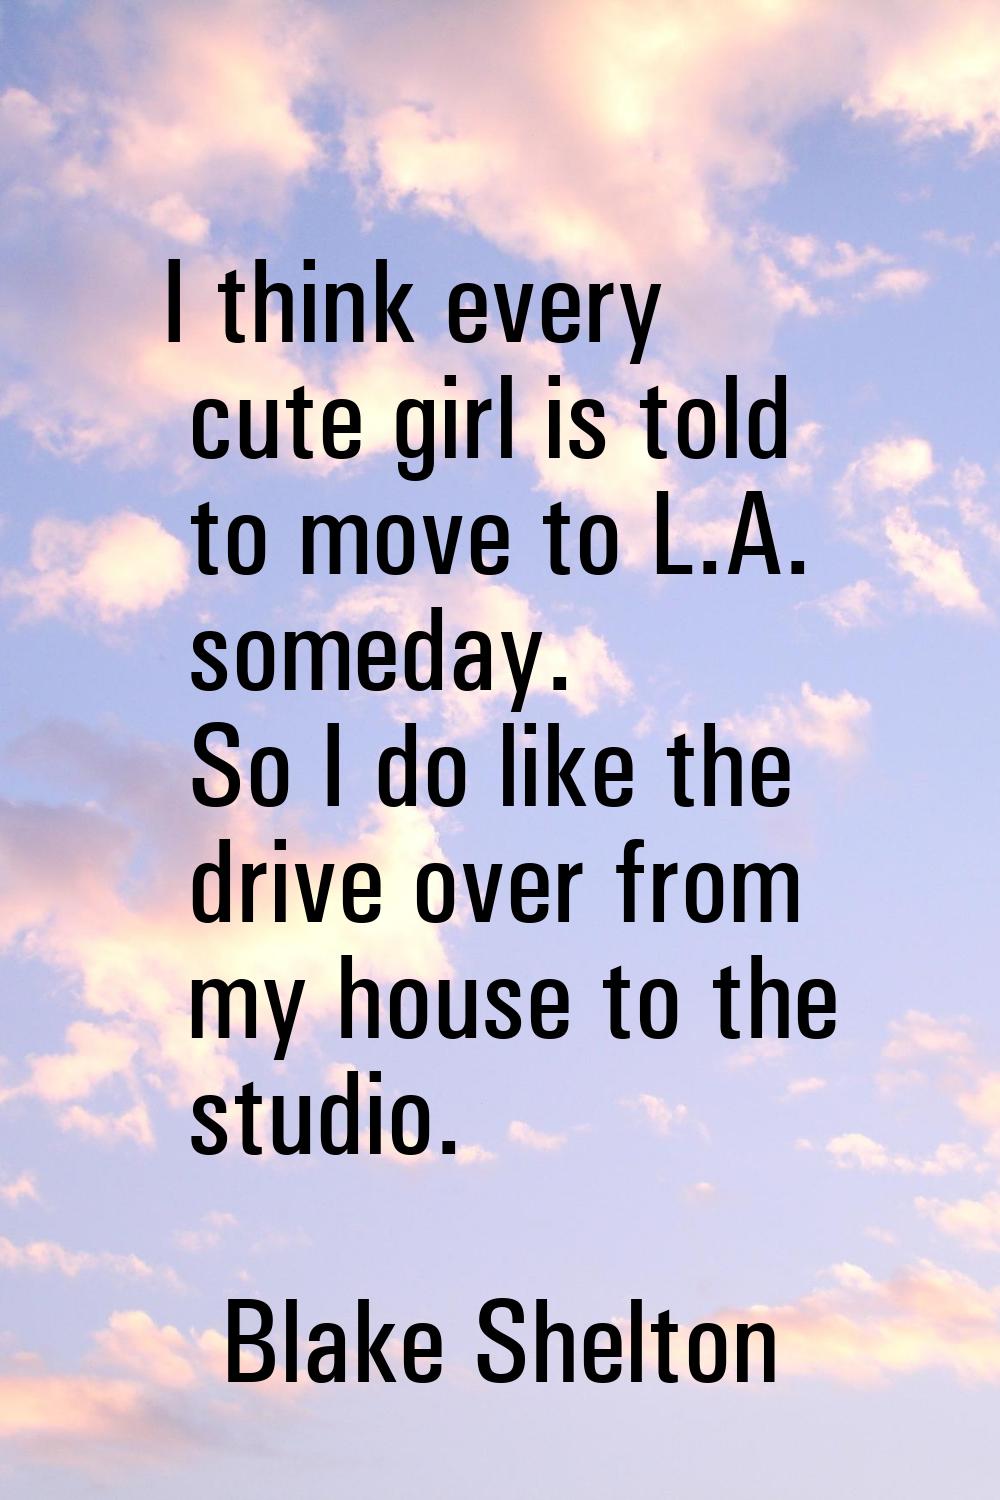 I think every cute girl is told to move to L.A. someday. So I do like the drive over from my house 